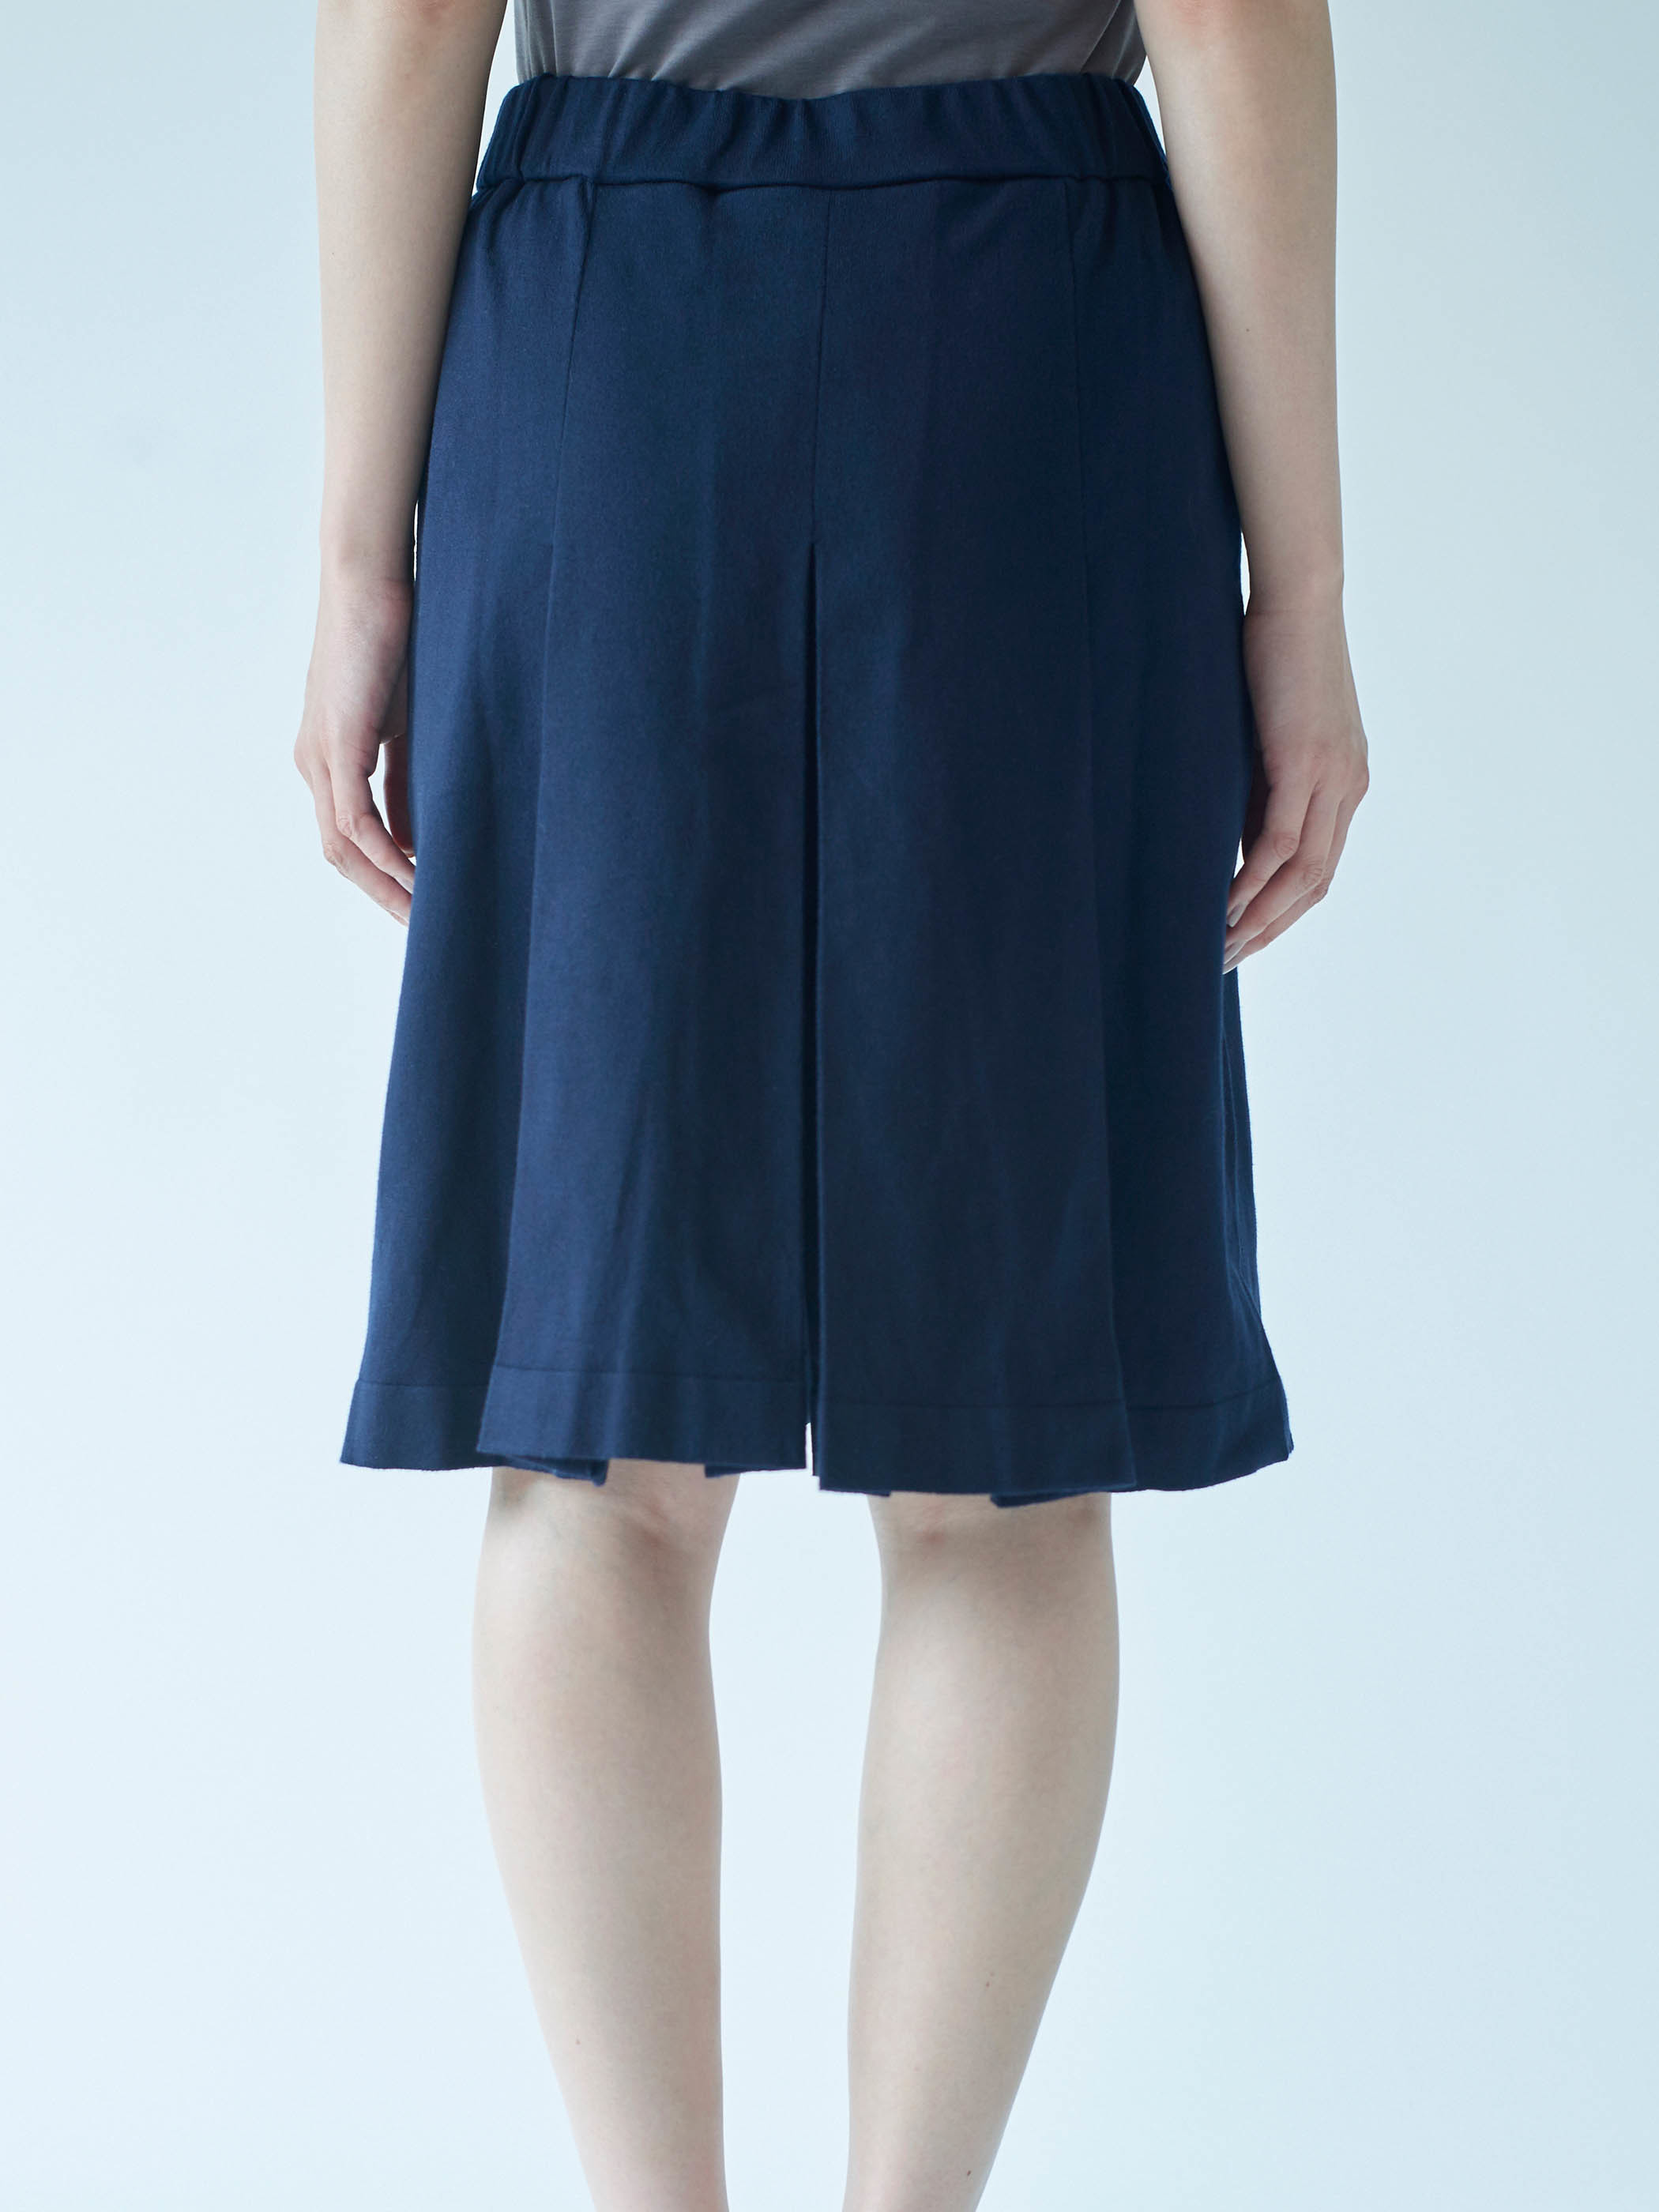 Work Wear collection Women’s Culotte Skirt Navy(キュロットスカート・ネイビー) - KNITOLOGY